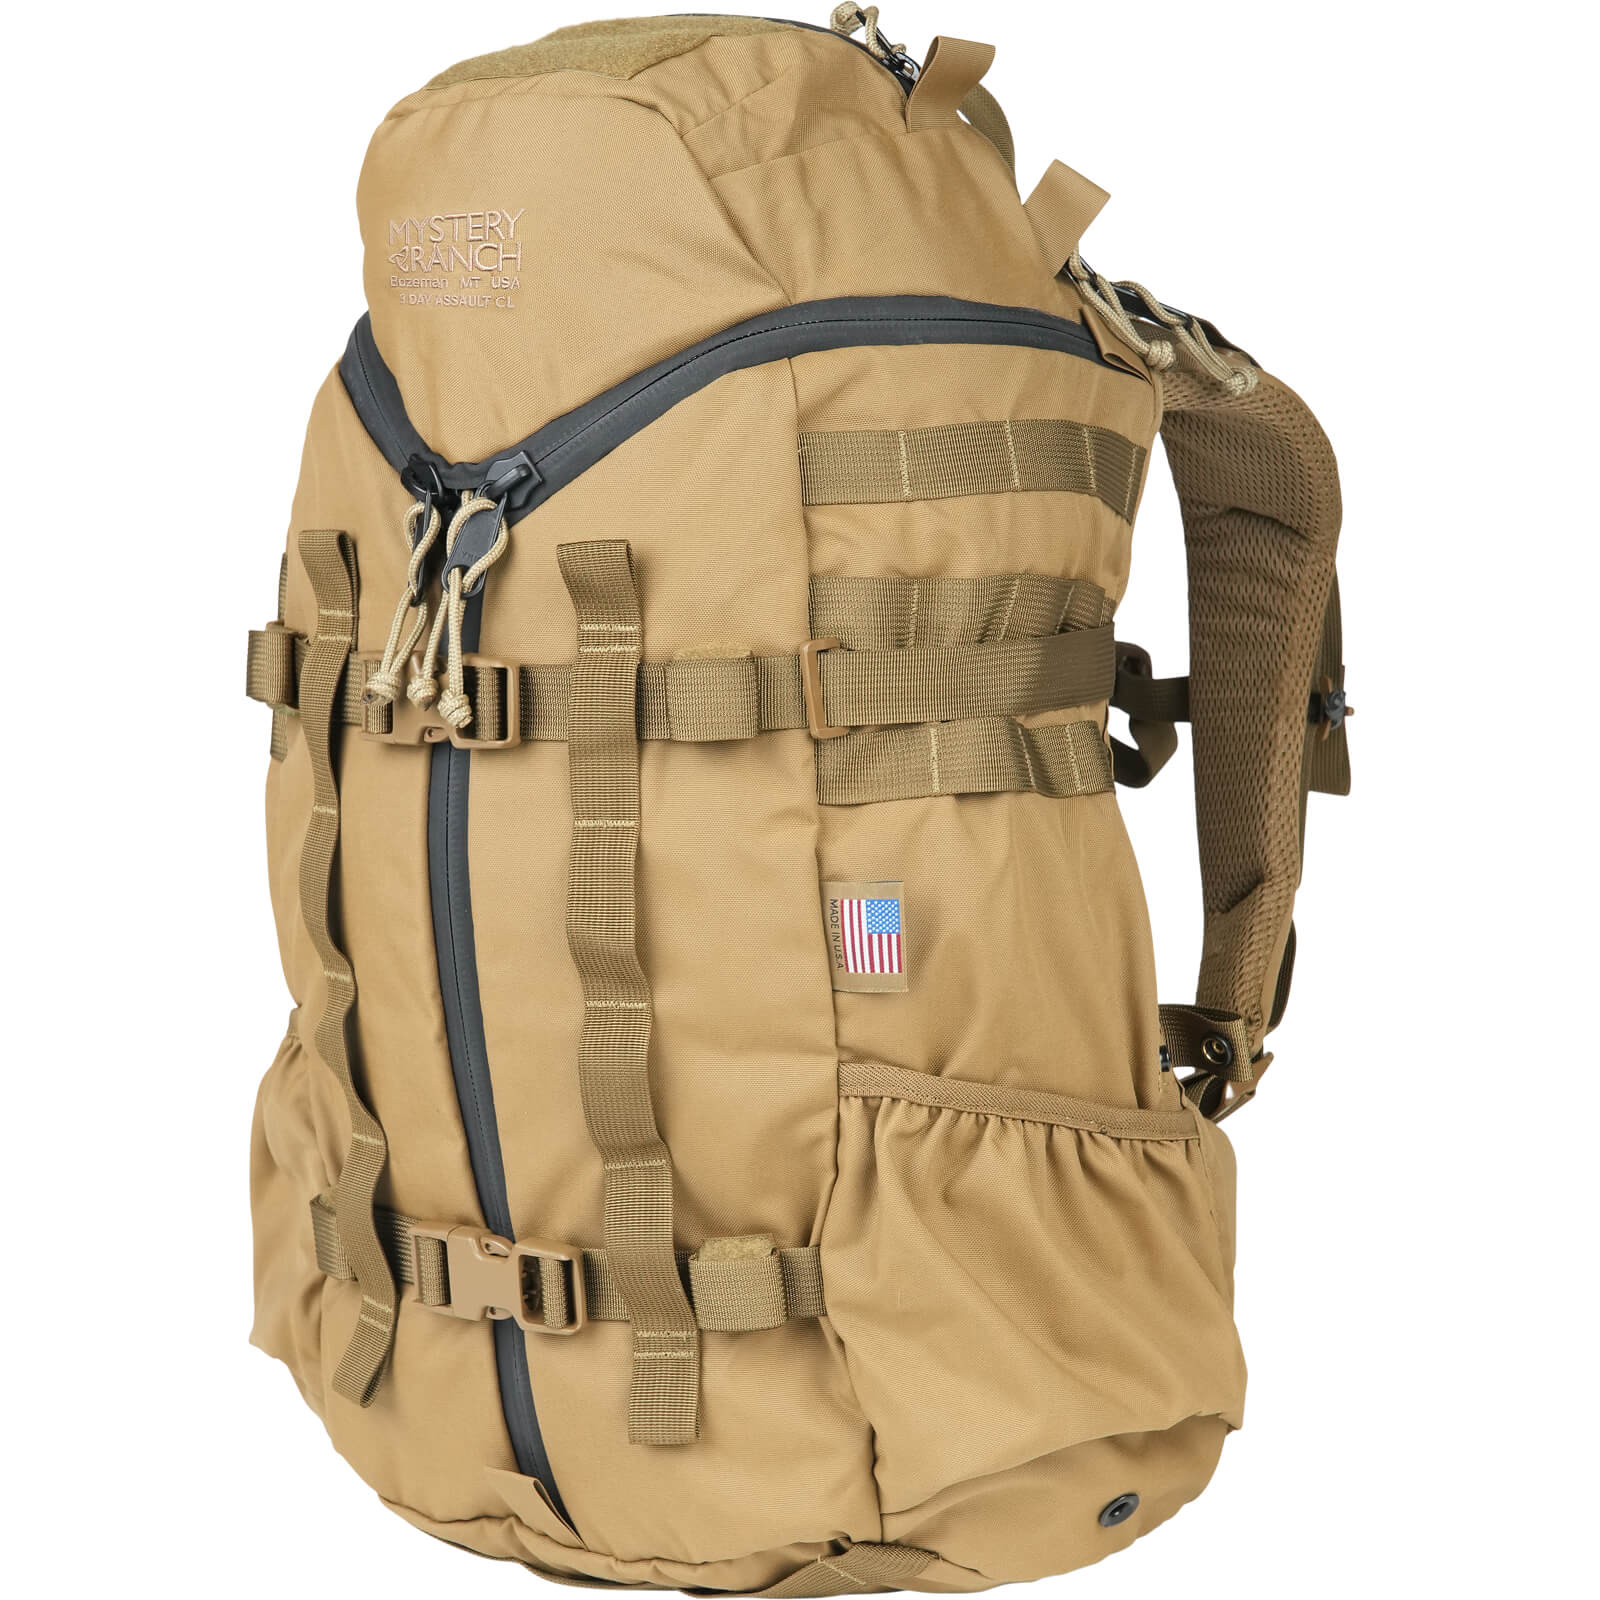 3 Day Assault CL Pack | MYSTERY RANCH Backpacks